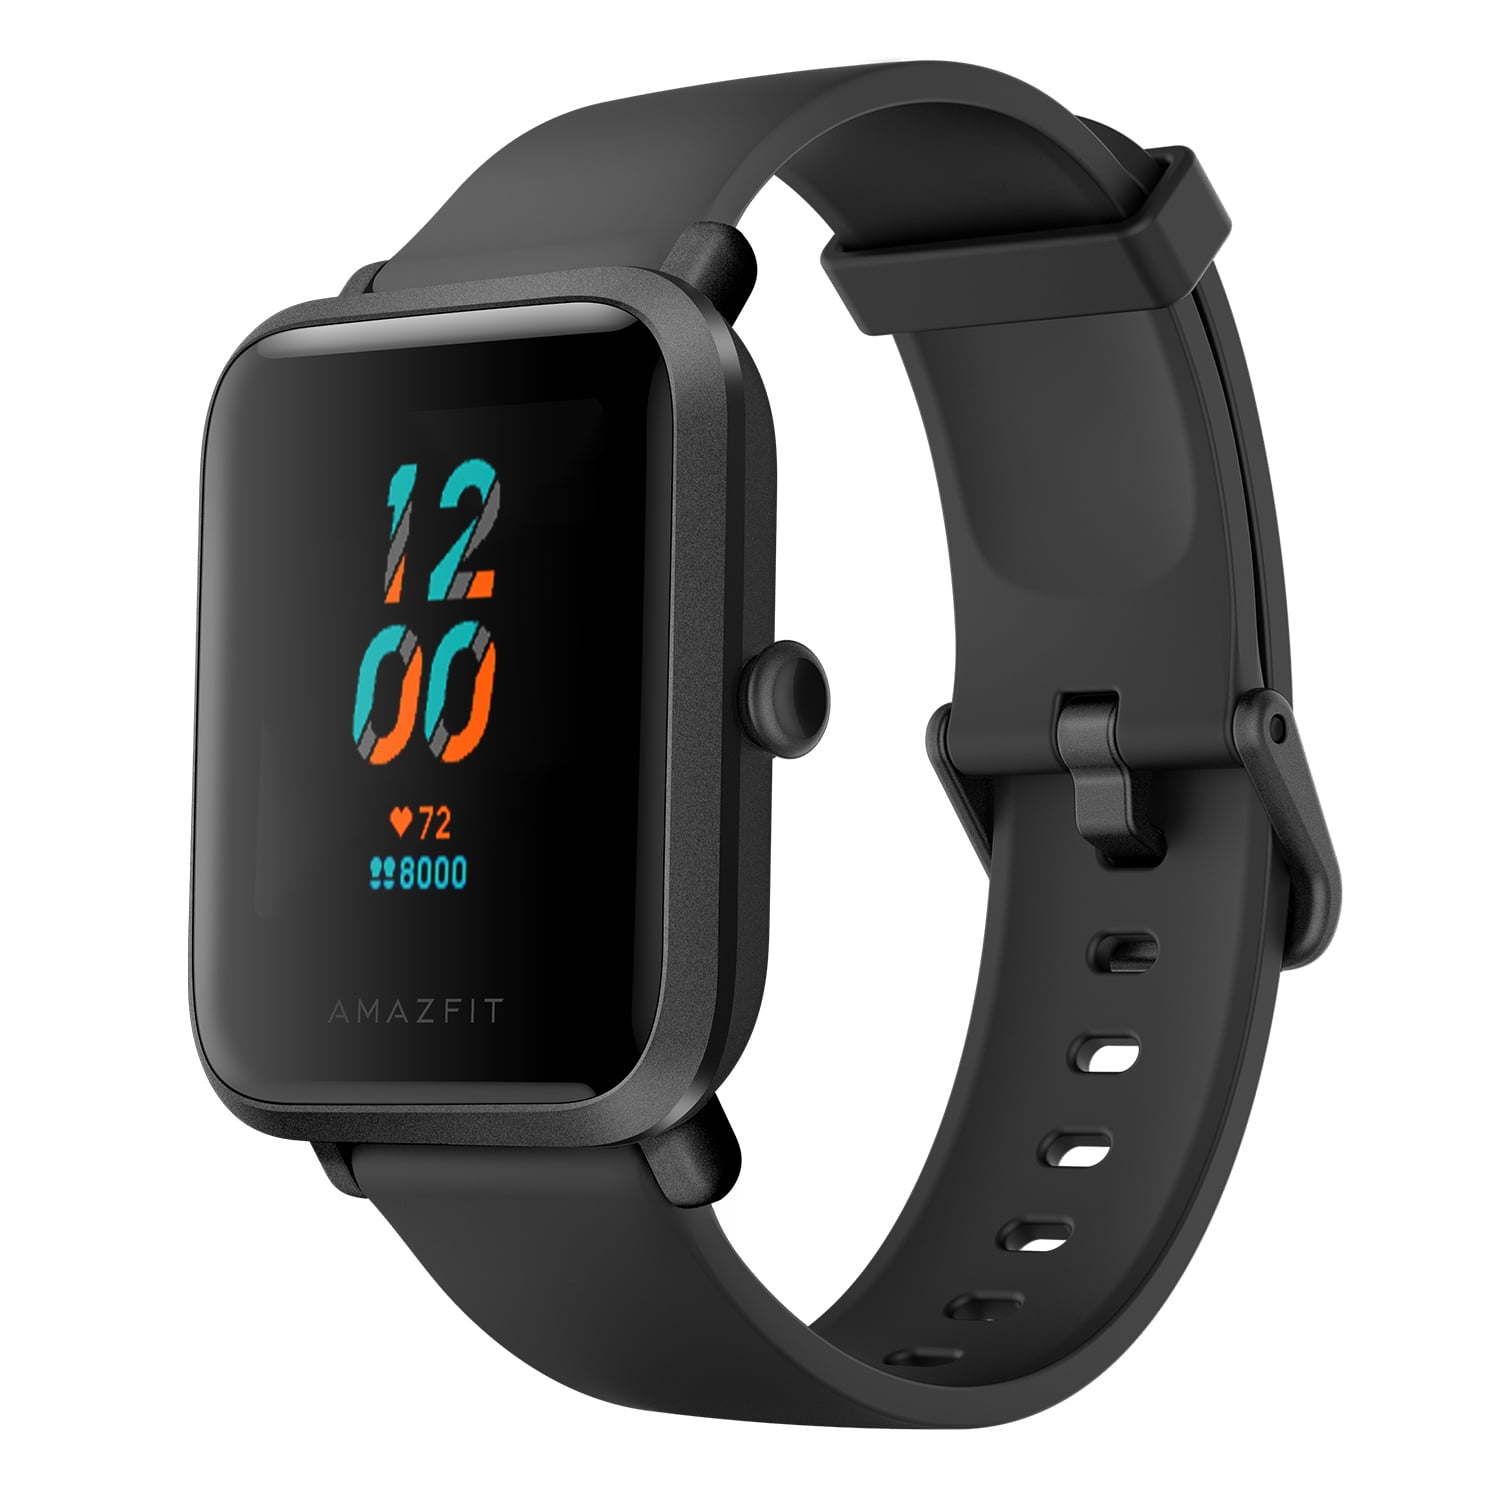 dier bouwen Dag Amazfit Bip S Fitness Smartwatch, 40 Day Battery Life, 10 Sports Modes,  Heart Rate, 1.28'' Always-On Display, Water Resistant, Built-in GPS, Carbon  Black - Walmart.com